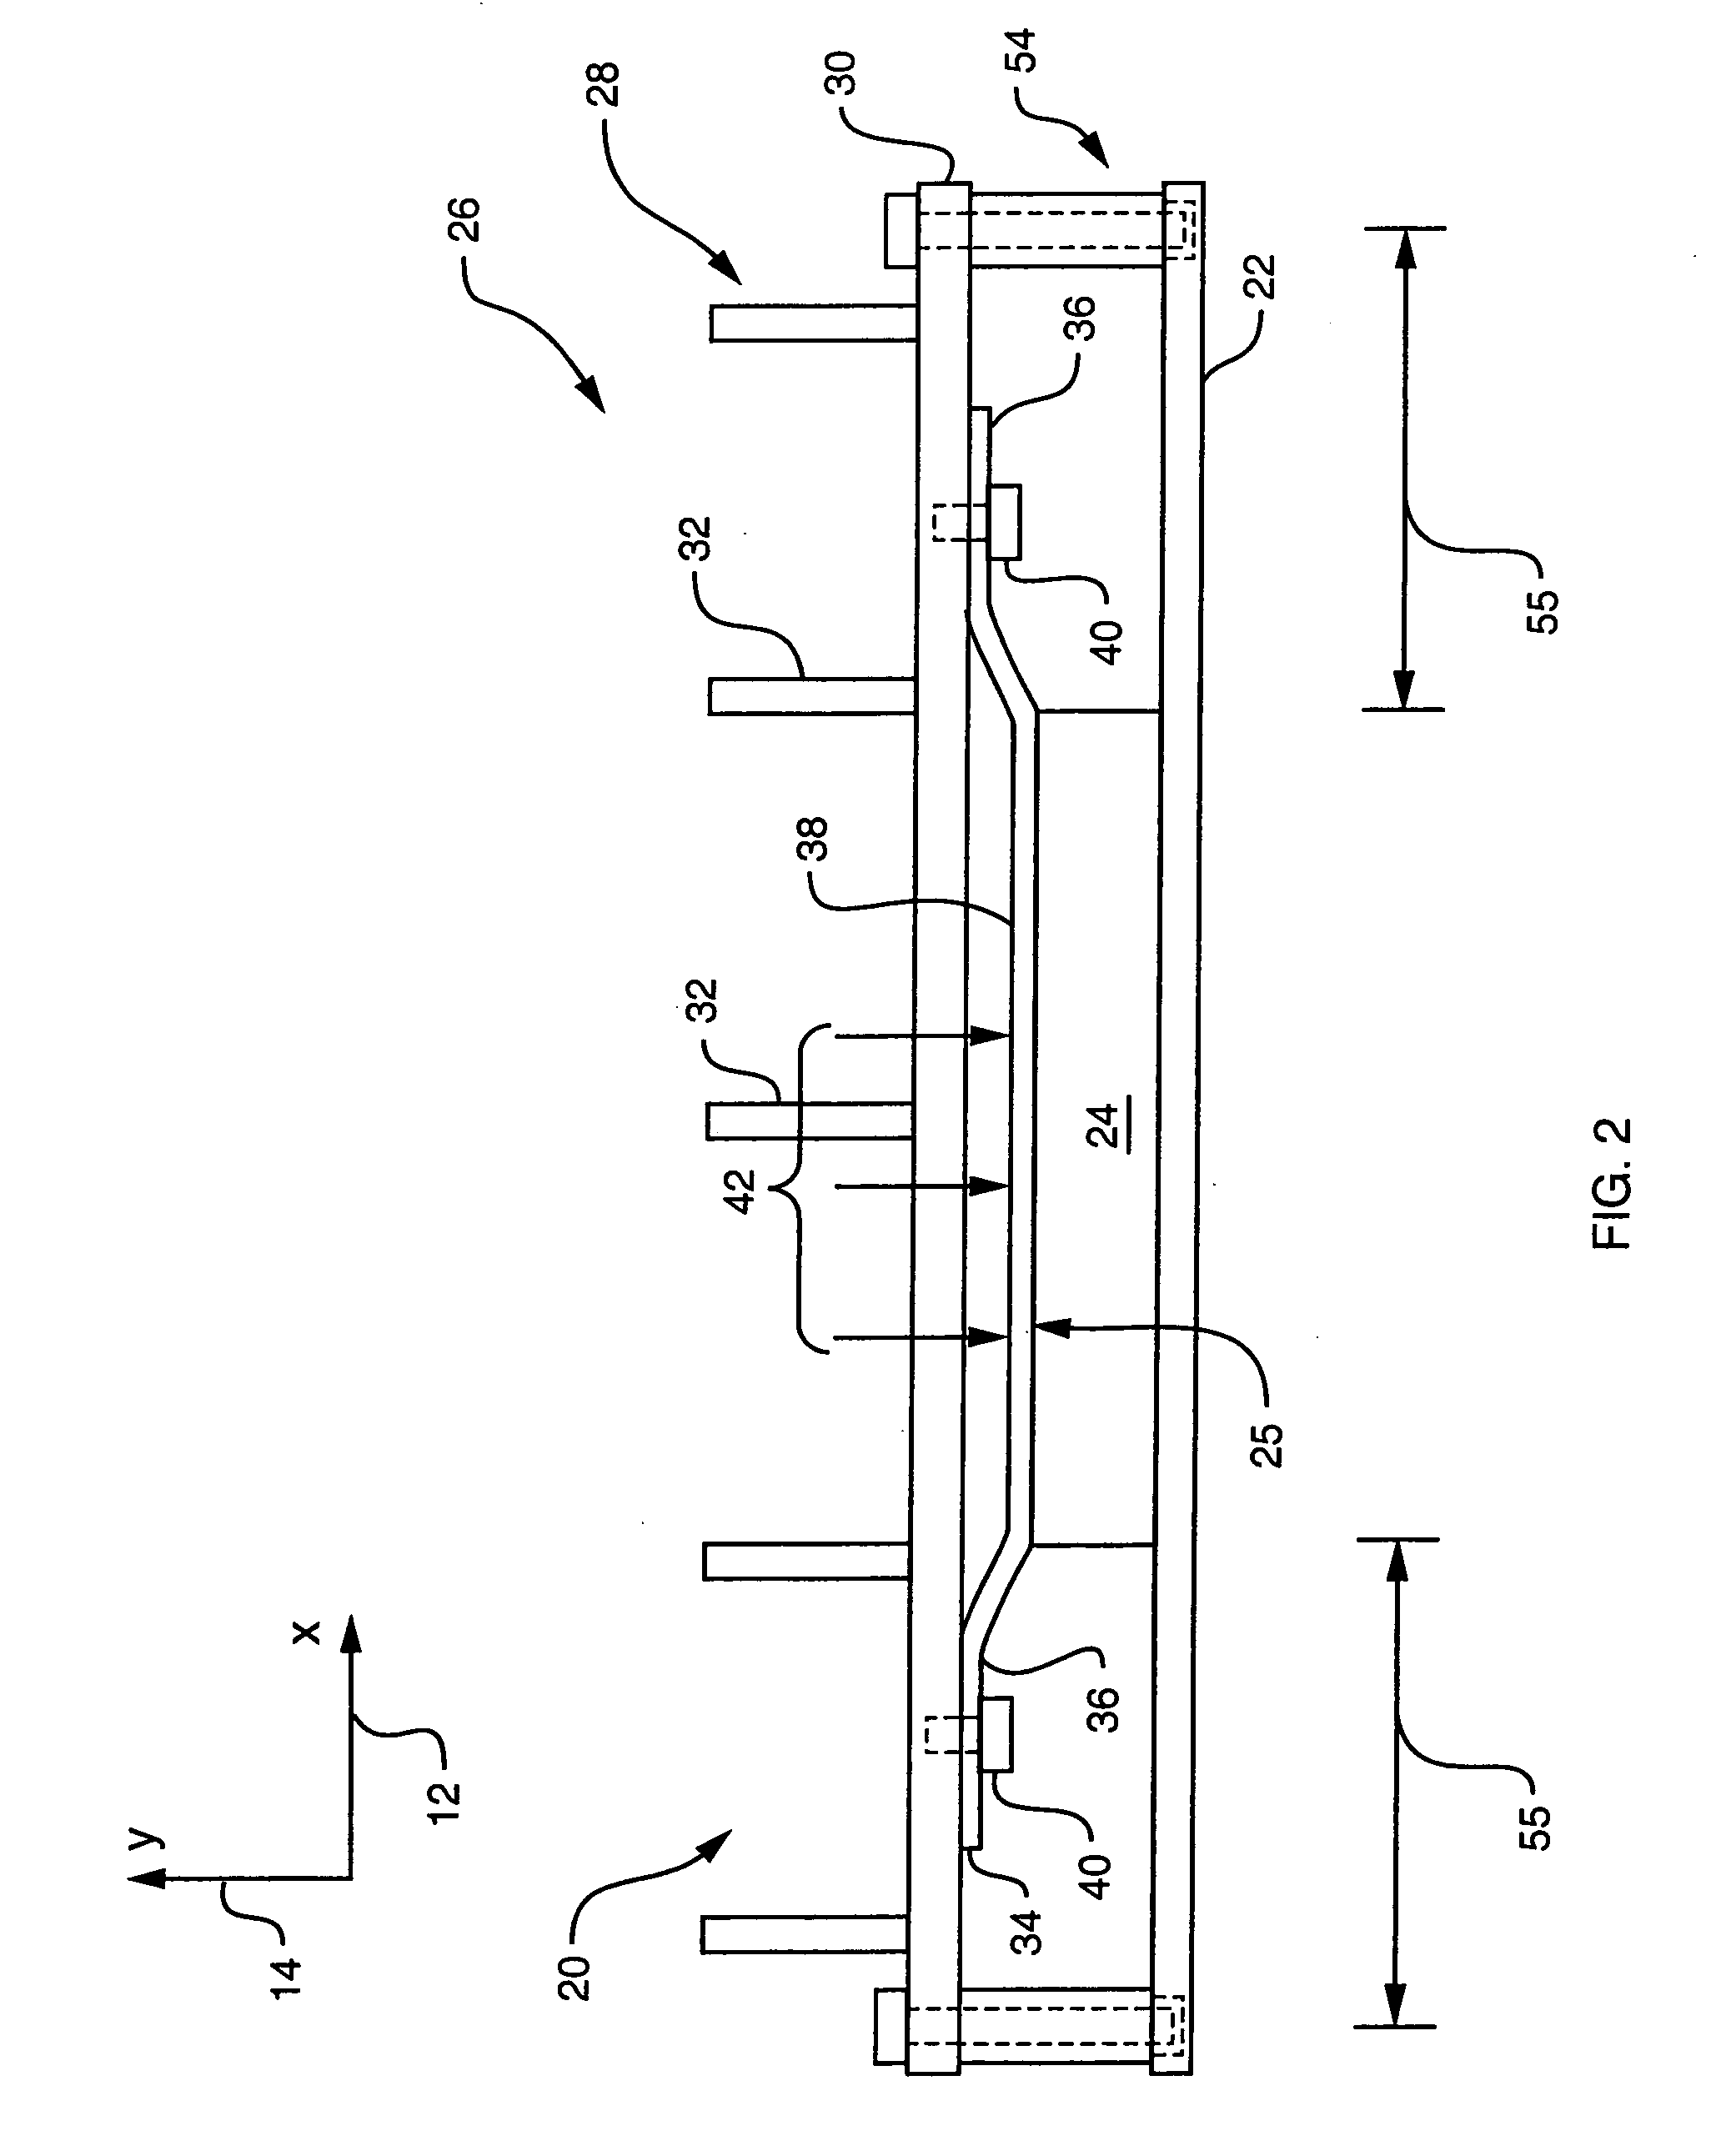 Methods and apparatus for thermally coupling a heat sink to a circuit board component